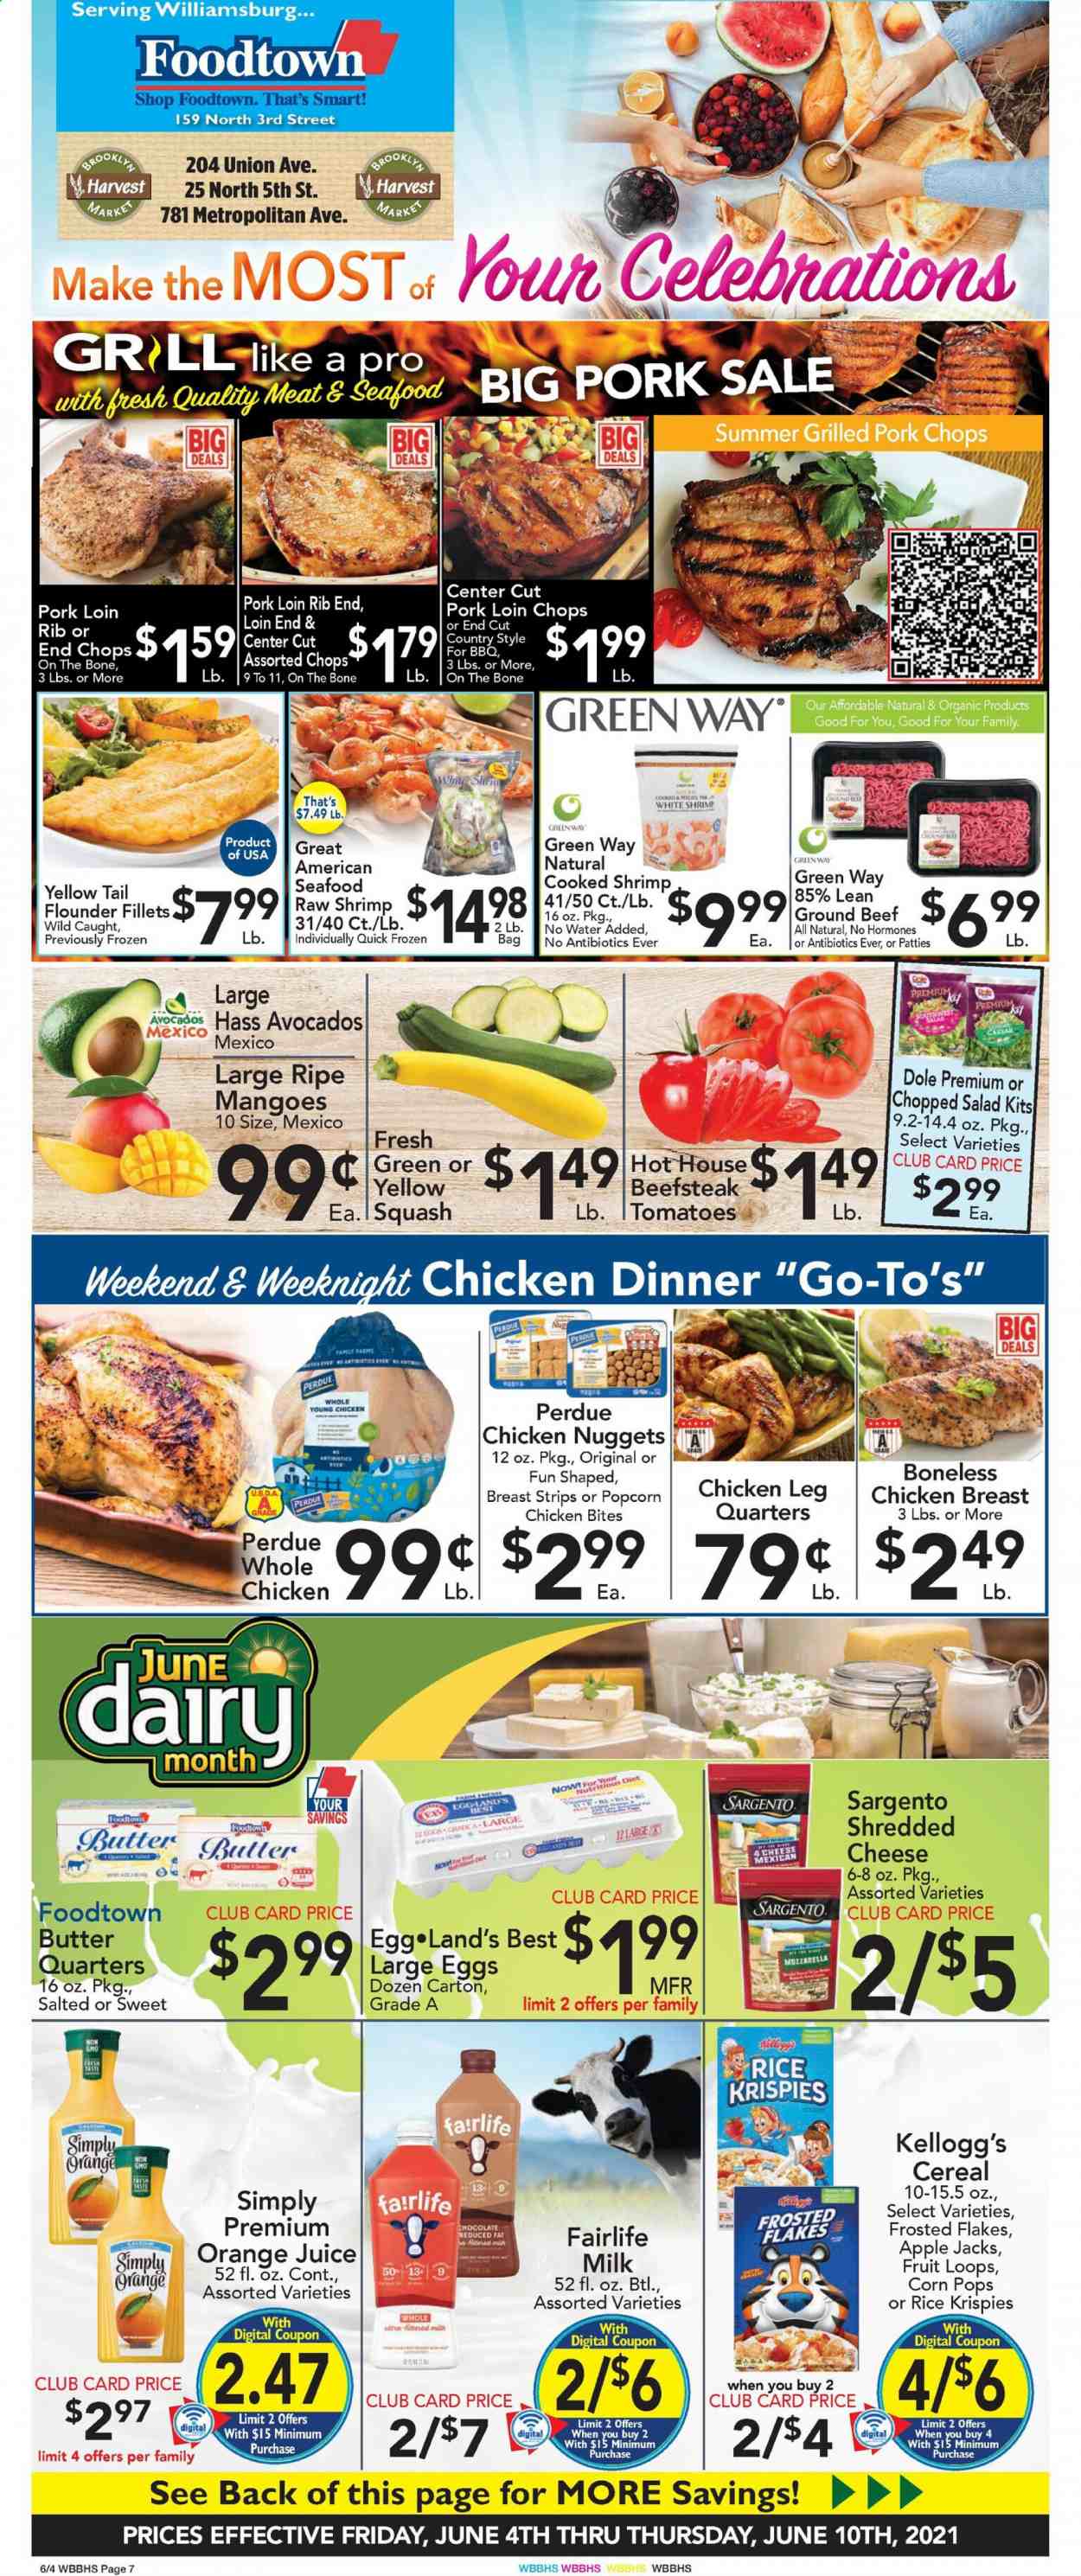 thumbnail - Foodtown Flyer - 06/04/2021 - 06/10/2021 - Sales products - tomatoes, salad, Dole, chopped salad, avocado, mango, flounder, seafood, shrimps, nuggets, chicken nuggets, Perdue®, mozzarella, cheese, Sargento, milk, large eggs, butter, chicken bites, strips, chocolate, Kellogg's, popcorn, cereals, Rice Krispies, Frosted Flakes, Corn Pops, orange juice, juice, whole chicken, chicken breasts, chicken legs, beef meat, ground beef, pork chops, pork loin, pork meat. Page 1.